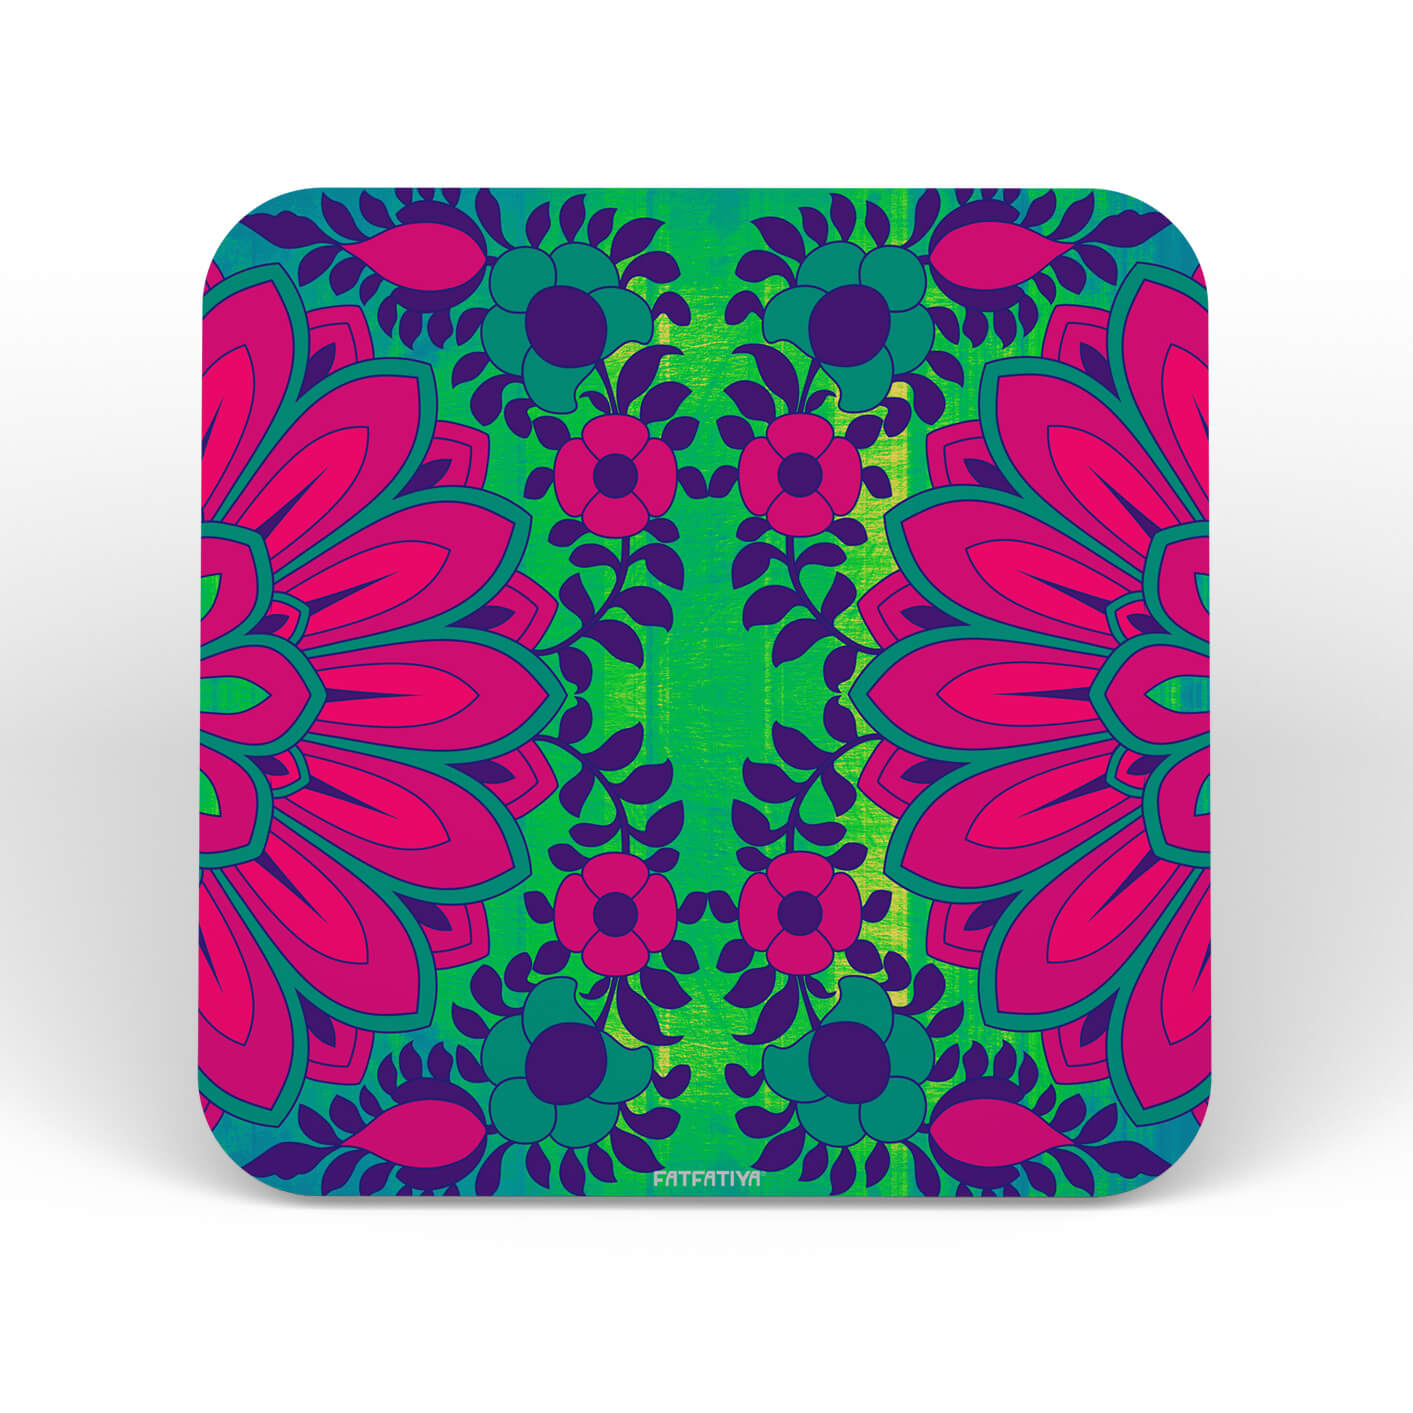 Shop for Quirky Designer Table Coaster Sets Online in India